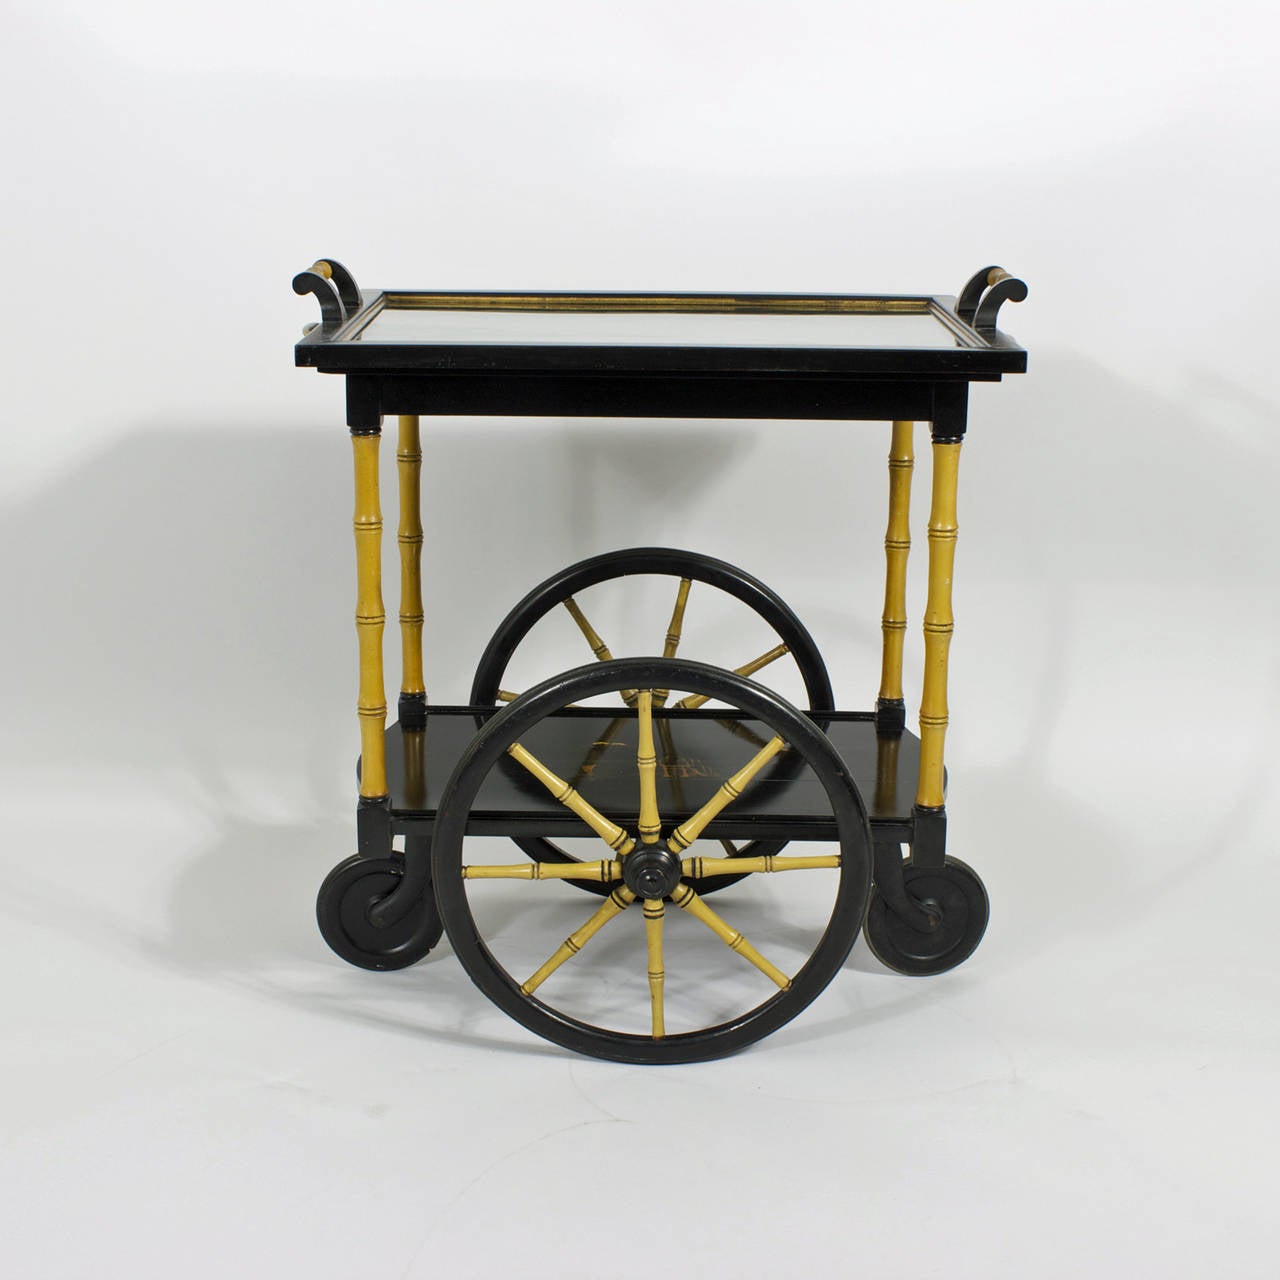 A mid century, tea or bar cart sometimes known as a drinks trolley executed in a light hearted chinoiserie style, lacquered in black with faux bamboo posts and spokes, a great play of tan and black color combinations.  Decorated in a classic Chinese